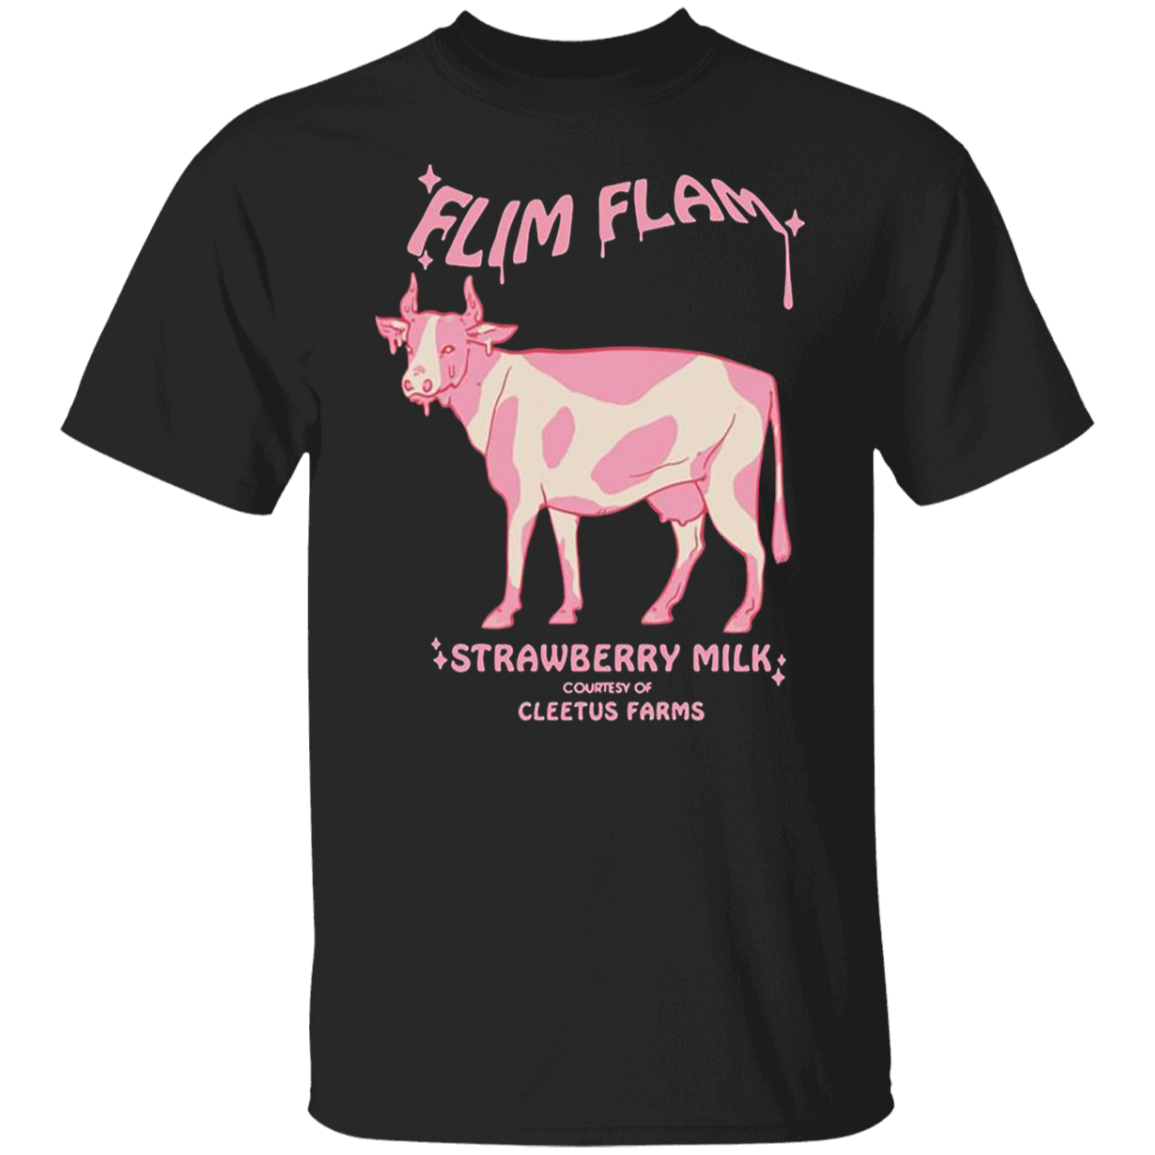 Flim Flam Strawberry Milk T-Shirt Courtesy of Cleetus Farms Shirt For Women Gift For Sister